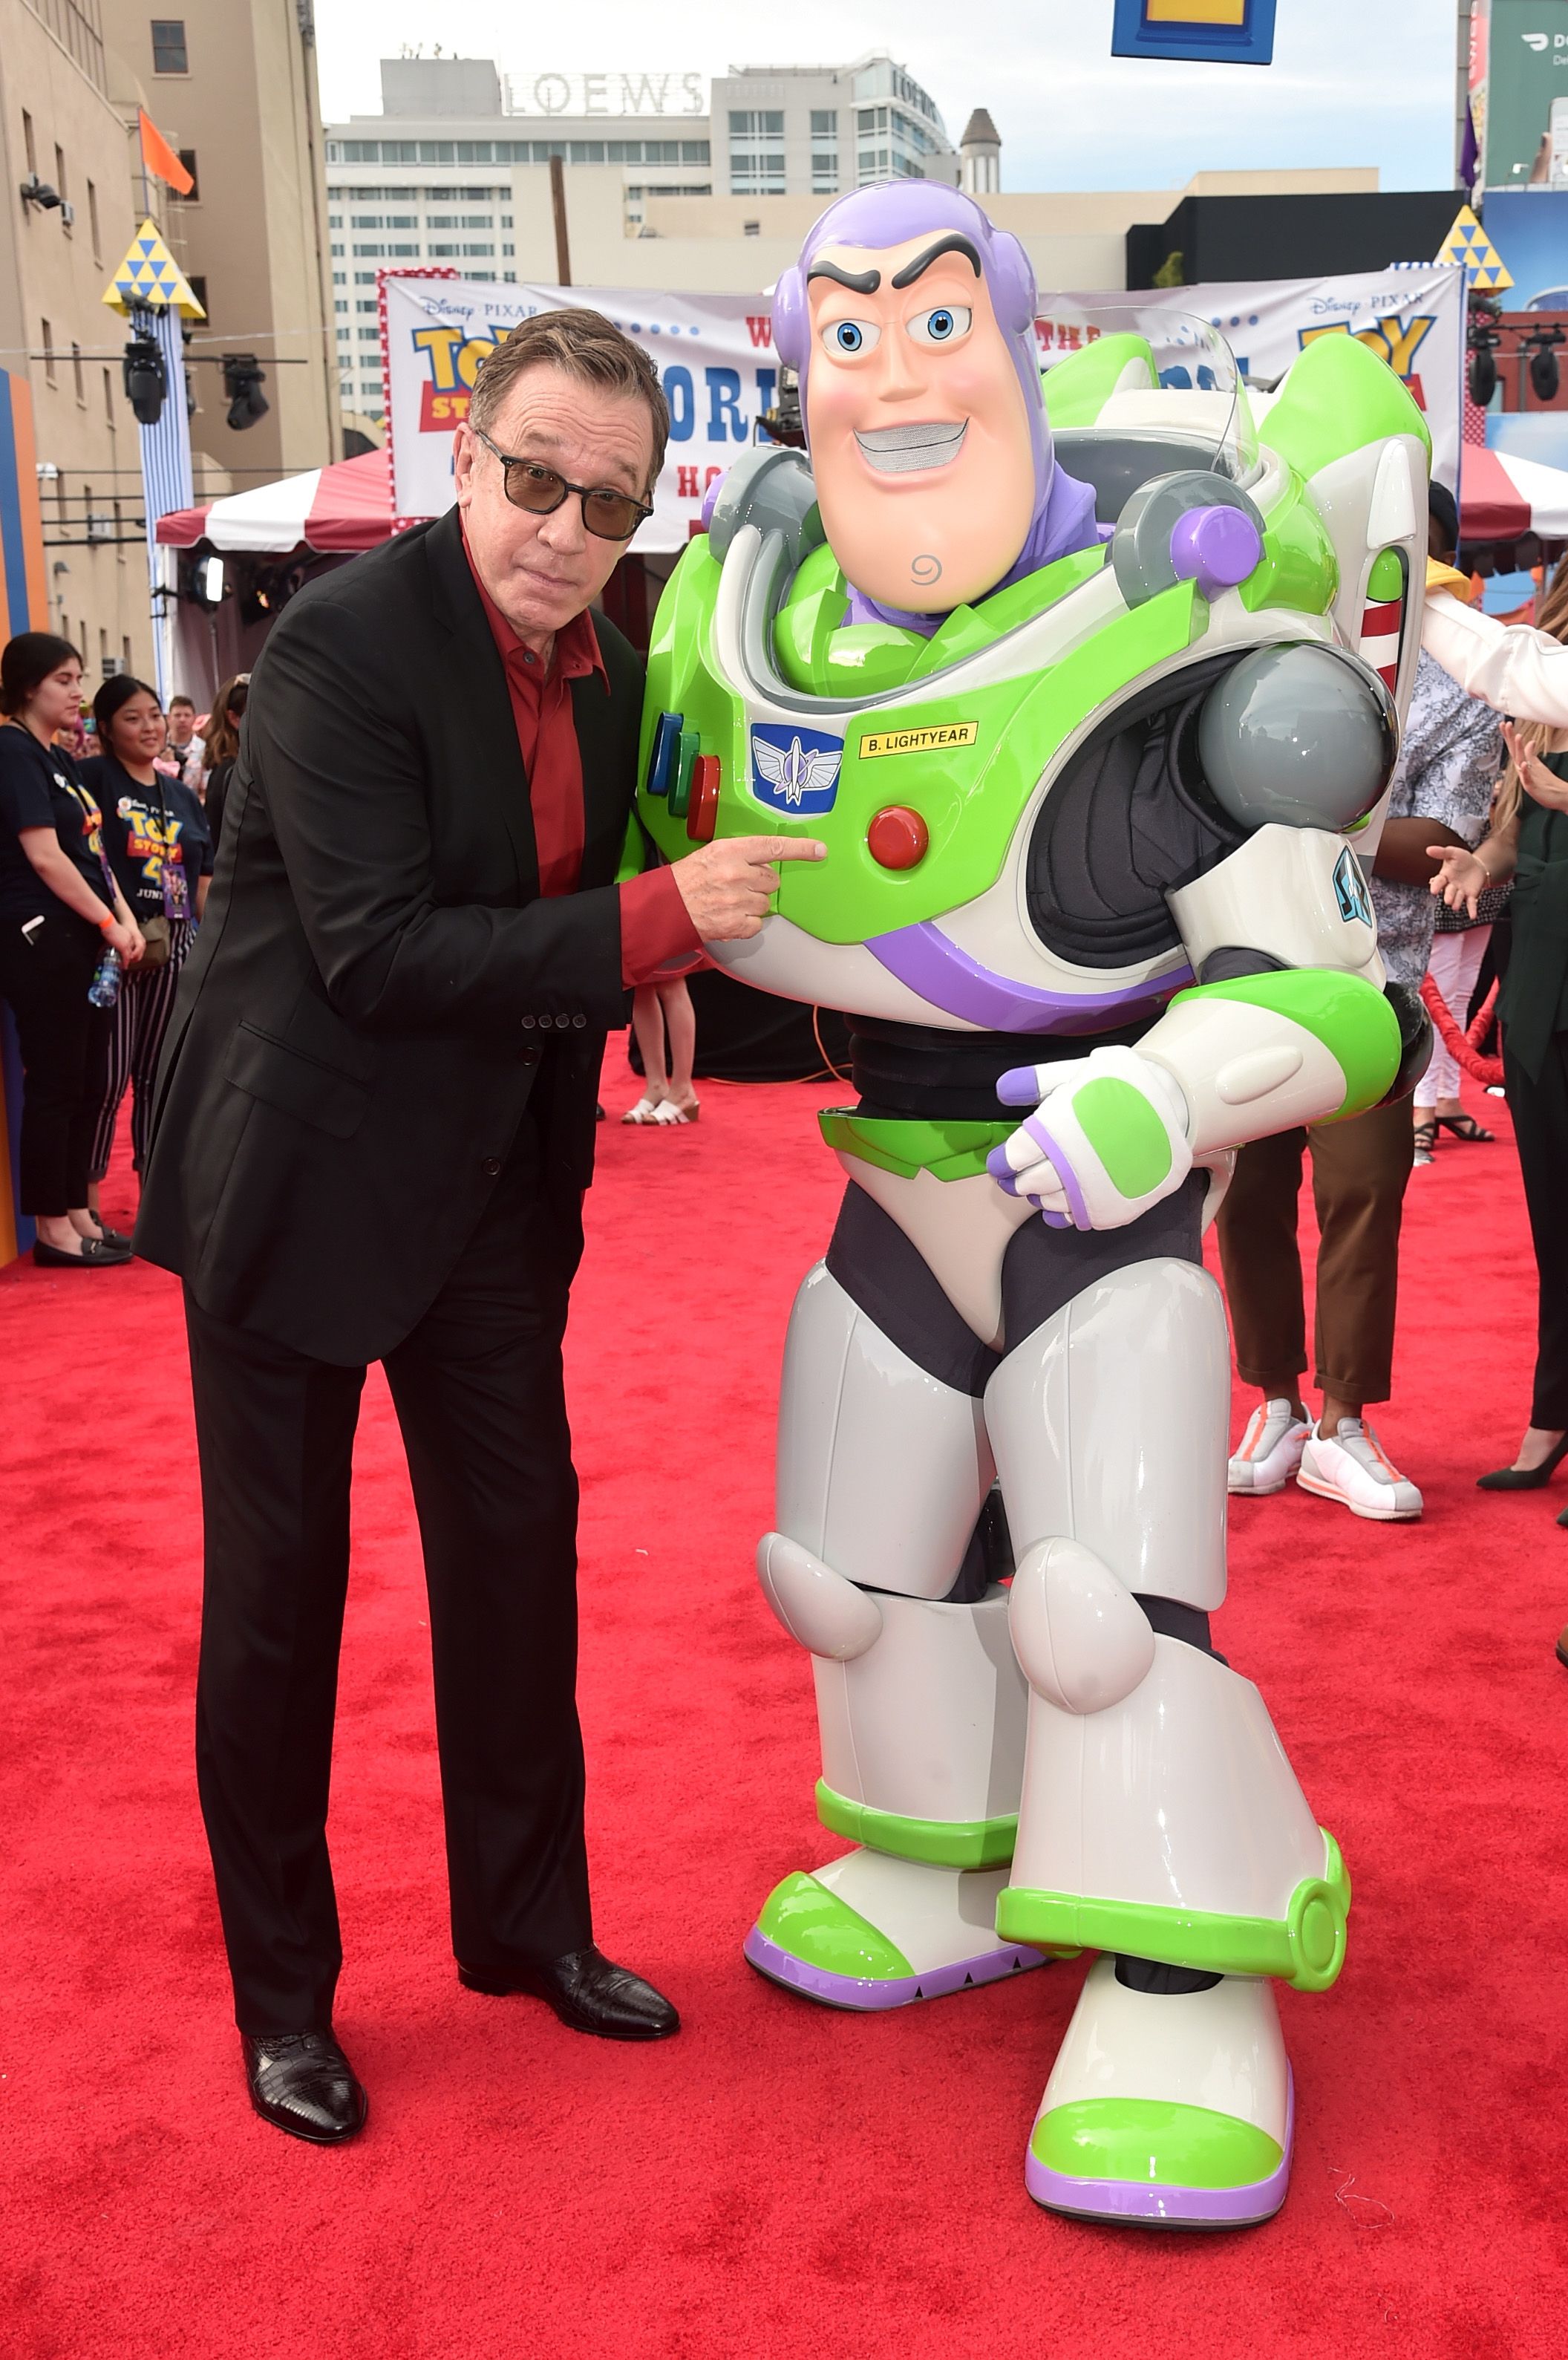 Tim Allen during the world premiere of Disney and Pixar's "Toy Story 4" at the El Capitan Theatre in Hollywood, CA on Tuesday, June 11, 2019. | Source: Getty Images